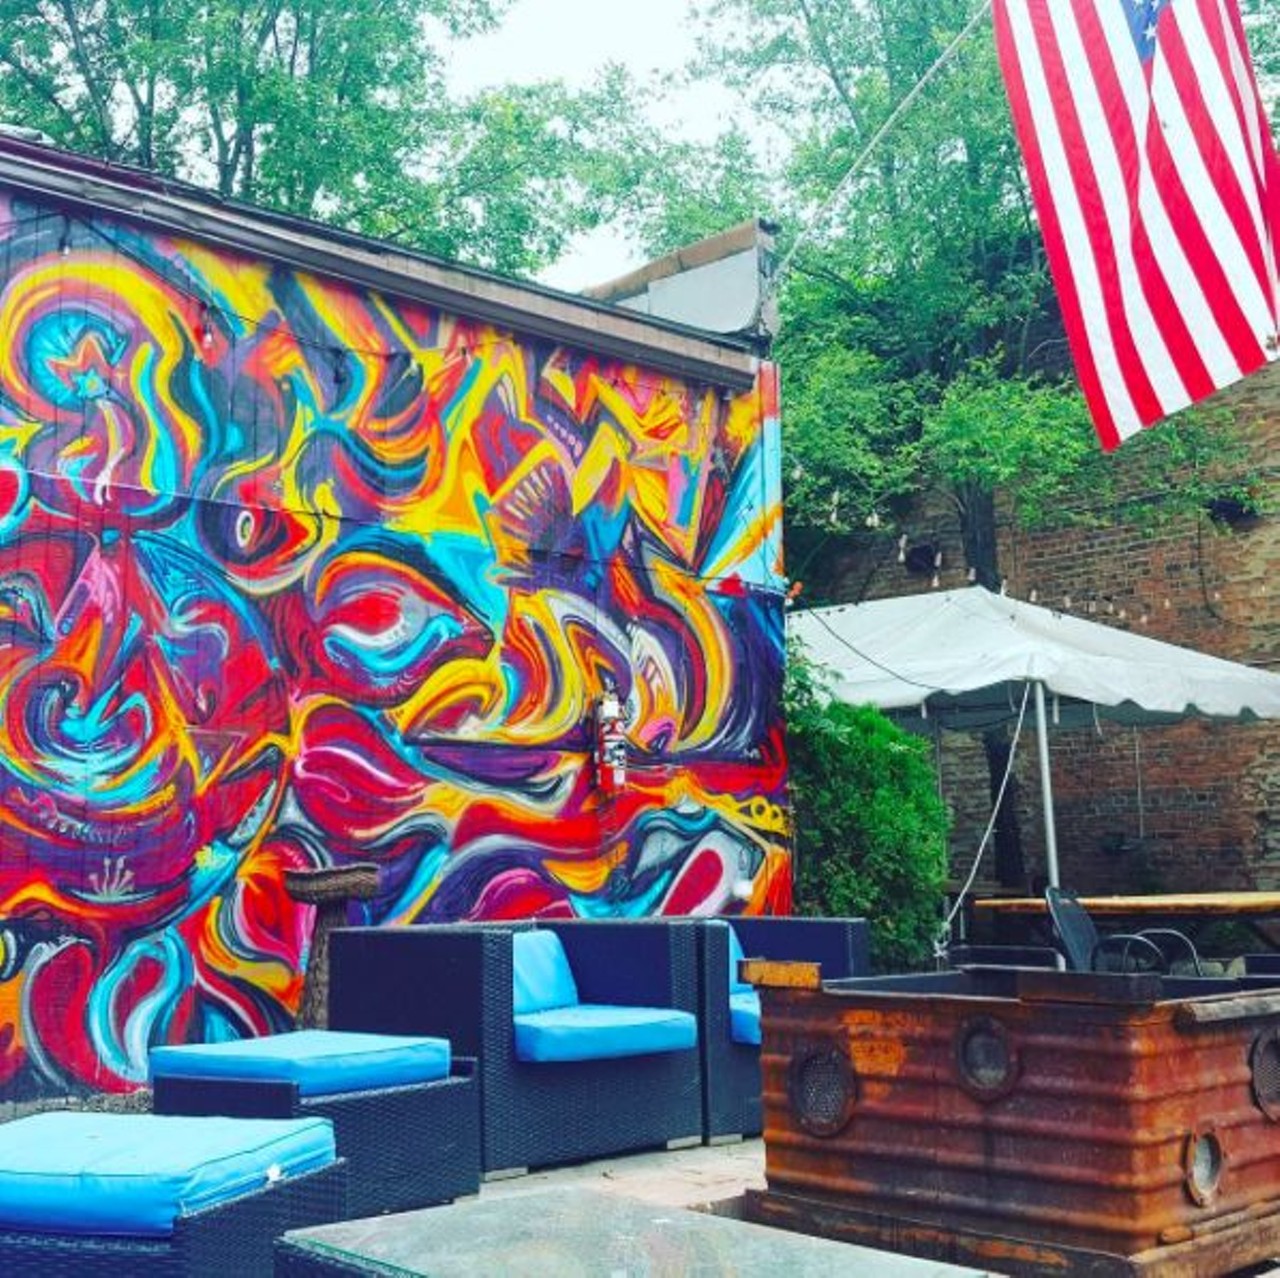 El Club
4114 Vernor Hwy, Detroit
El Club is the perfect spot to end your bike tour. This venue has an artsy outdoor patio, live concerts and three full service bars. Order a pizza and maybe one more drink if you can handle it and enjoy the rest of the night. Photo via @mobilehomesteader. 